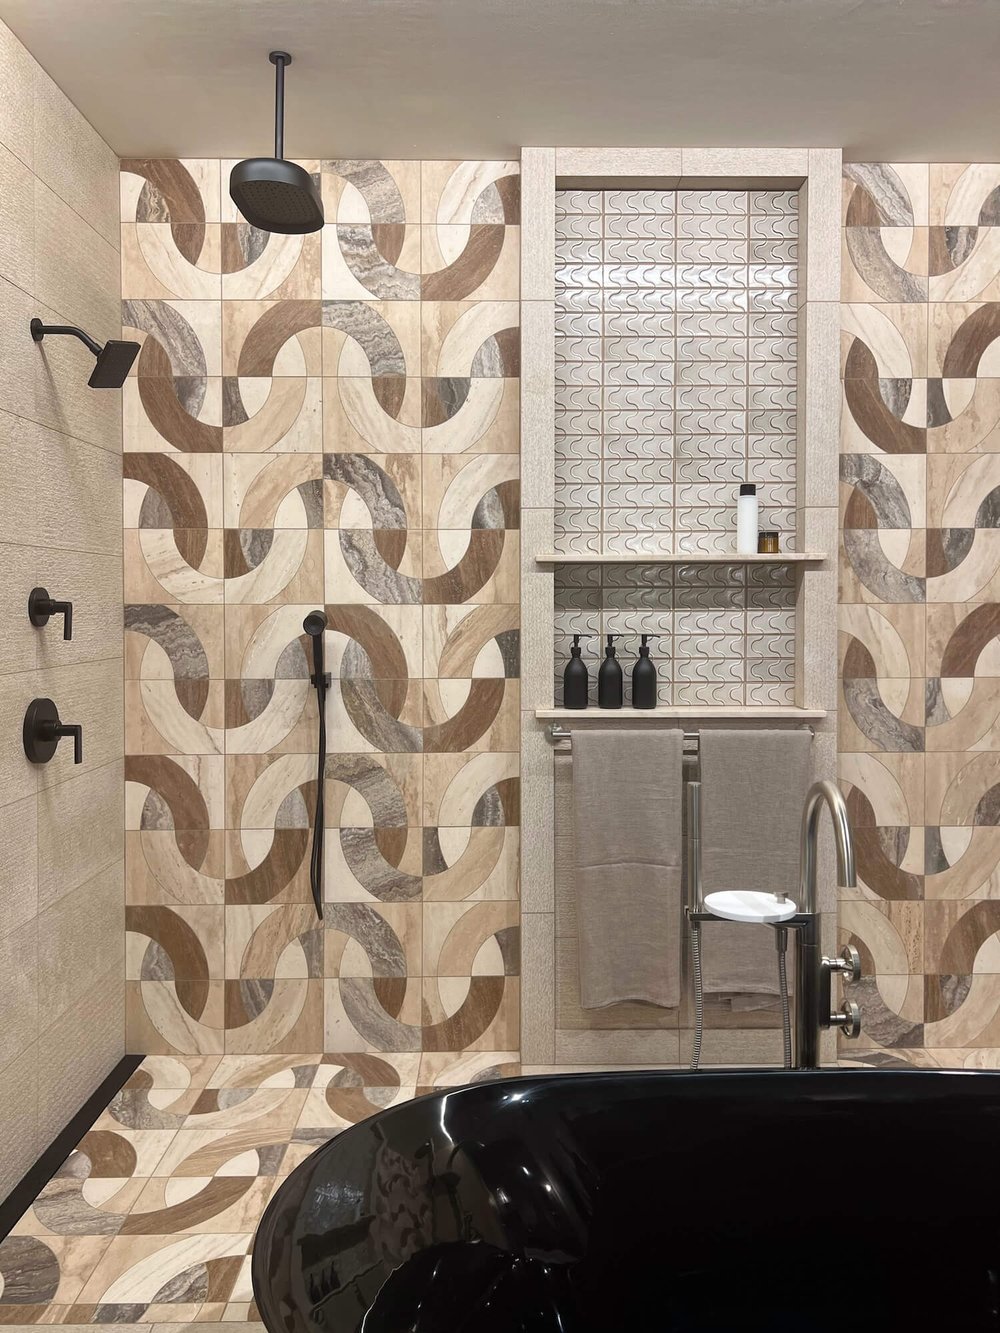 carved subway tile in a bath display